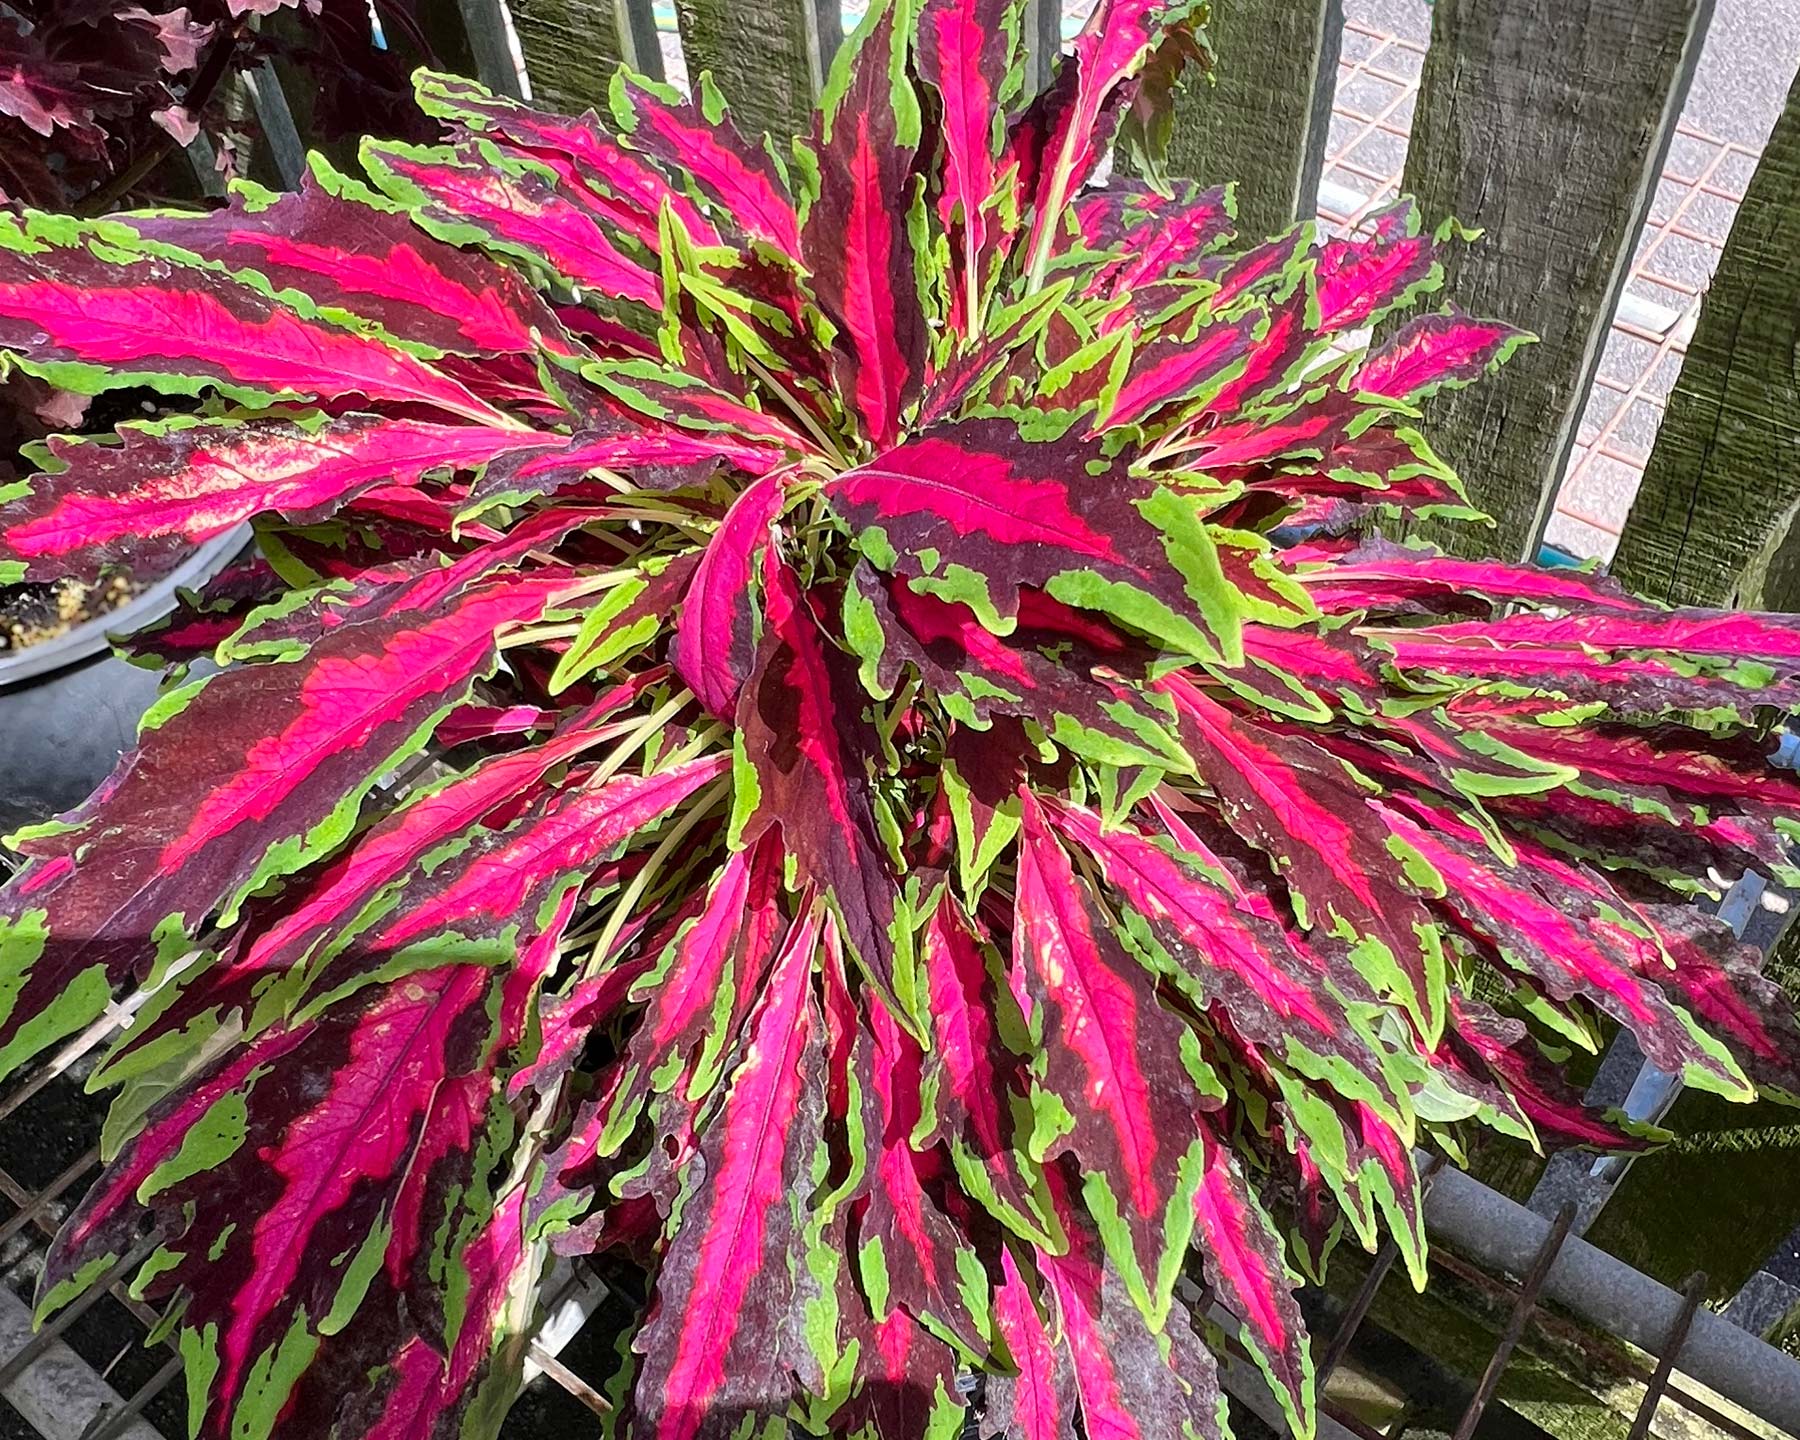 Coleus scutellarioides  - long narrow leaves - deep pink, maroon and green